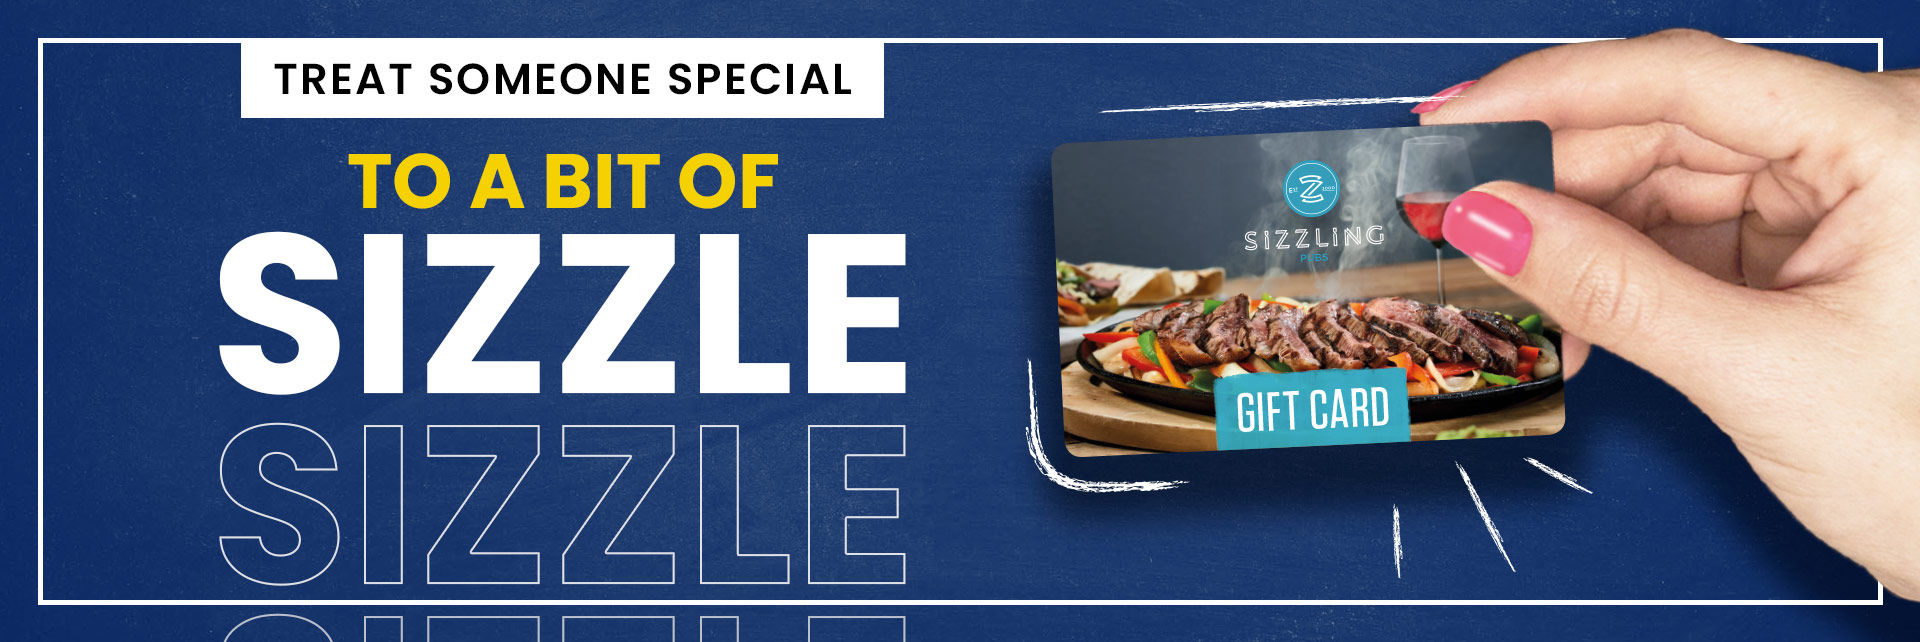 Sizzling Pubs Gift Card at The Blossoms in Lytham St Annes